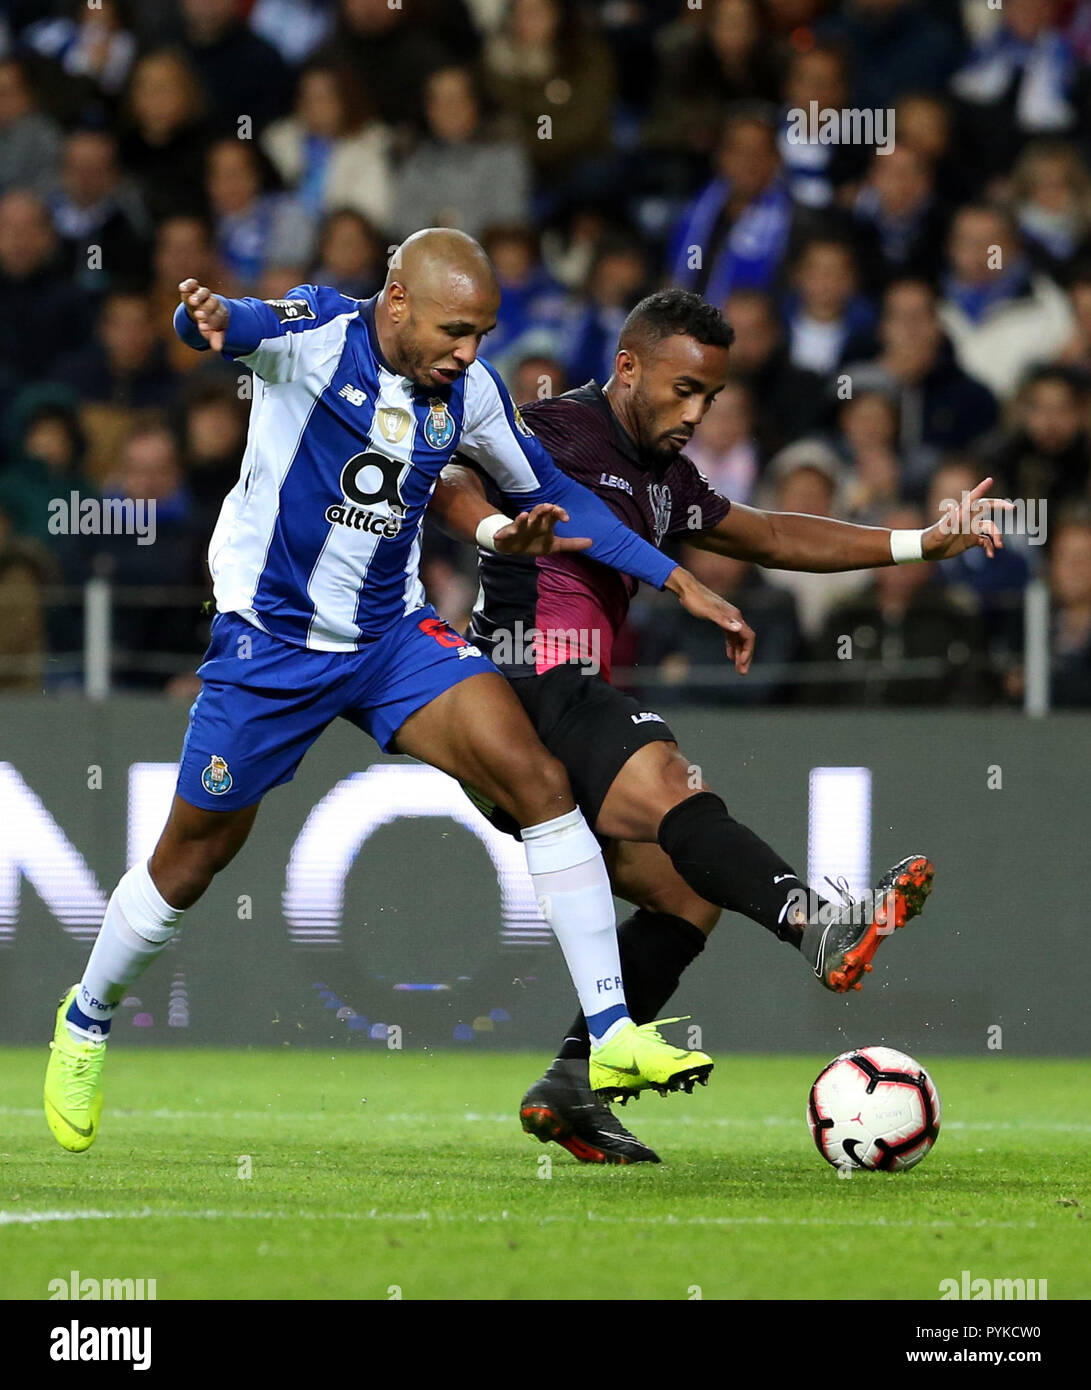 Porto, Portugal. 28th Oct, 2018. Yacine Brahimi (L) of Porto vies with Edson Farias of Feirense during the Portuguese League soccer match between FC Porto and CD Feirense at Dragon Stadium in Porto, Portugal, Oct. 28, 2018. FC Porto won 2-0. Credit: Catarina Morais/Xinhua/Alamy Live News Stock Photo